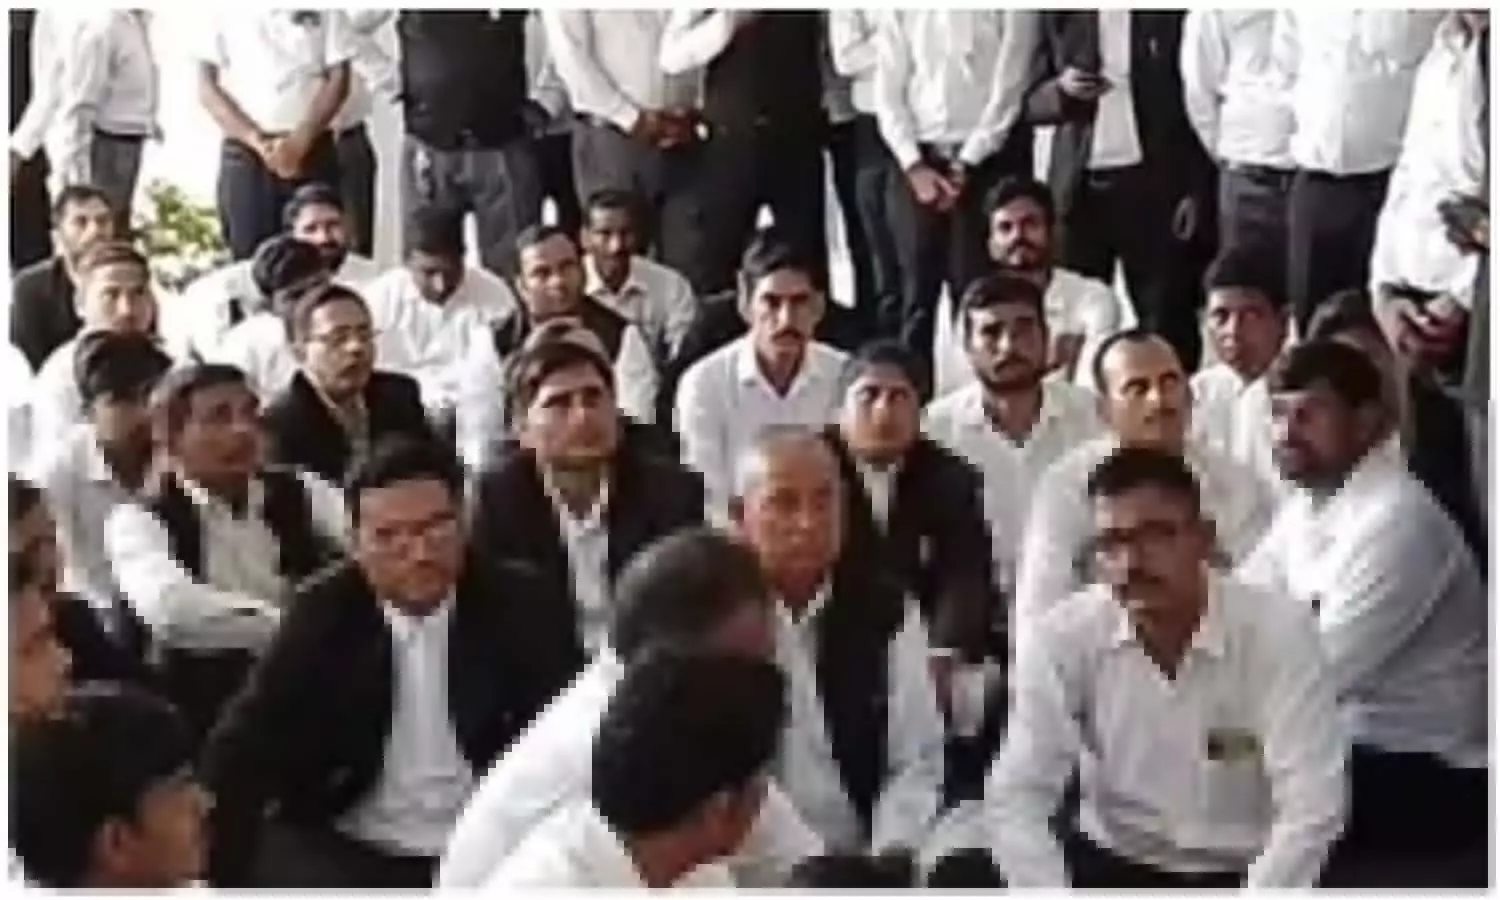 lawyers demonstrated in DM office